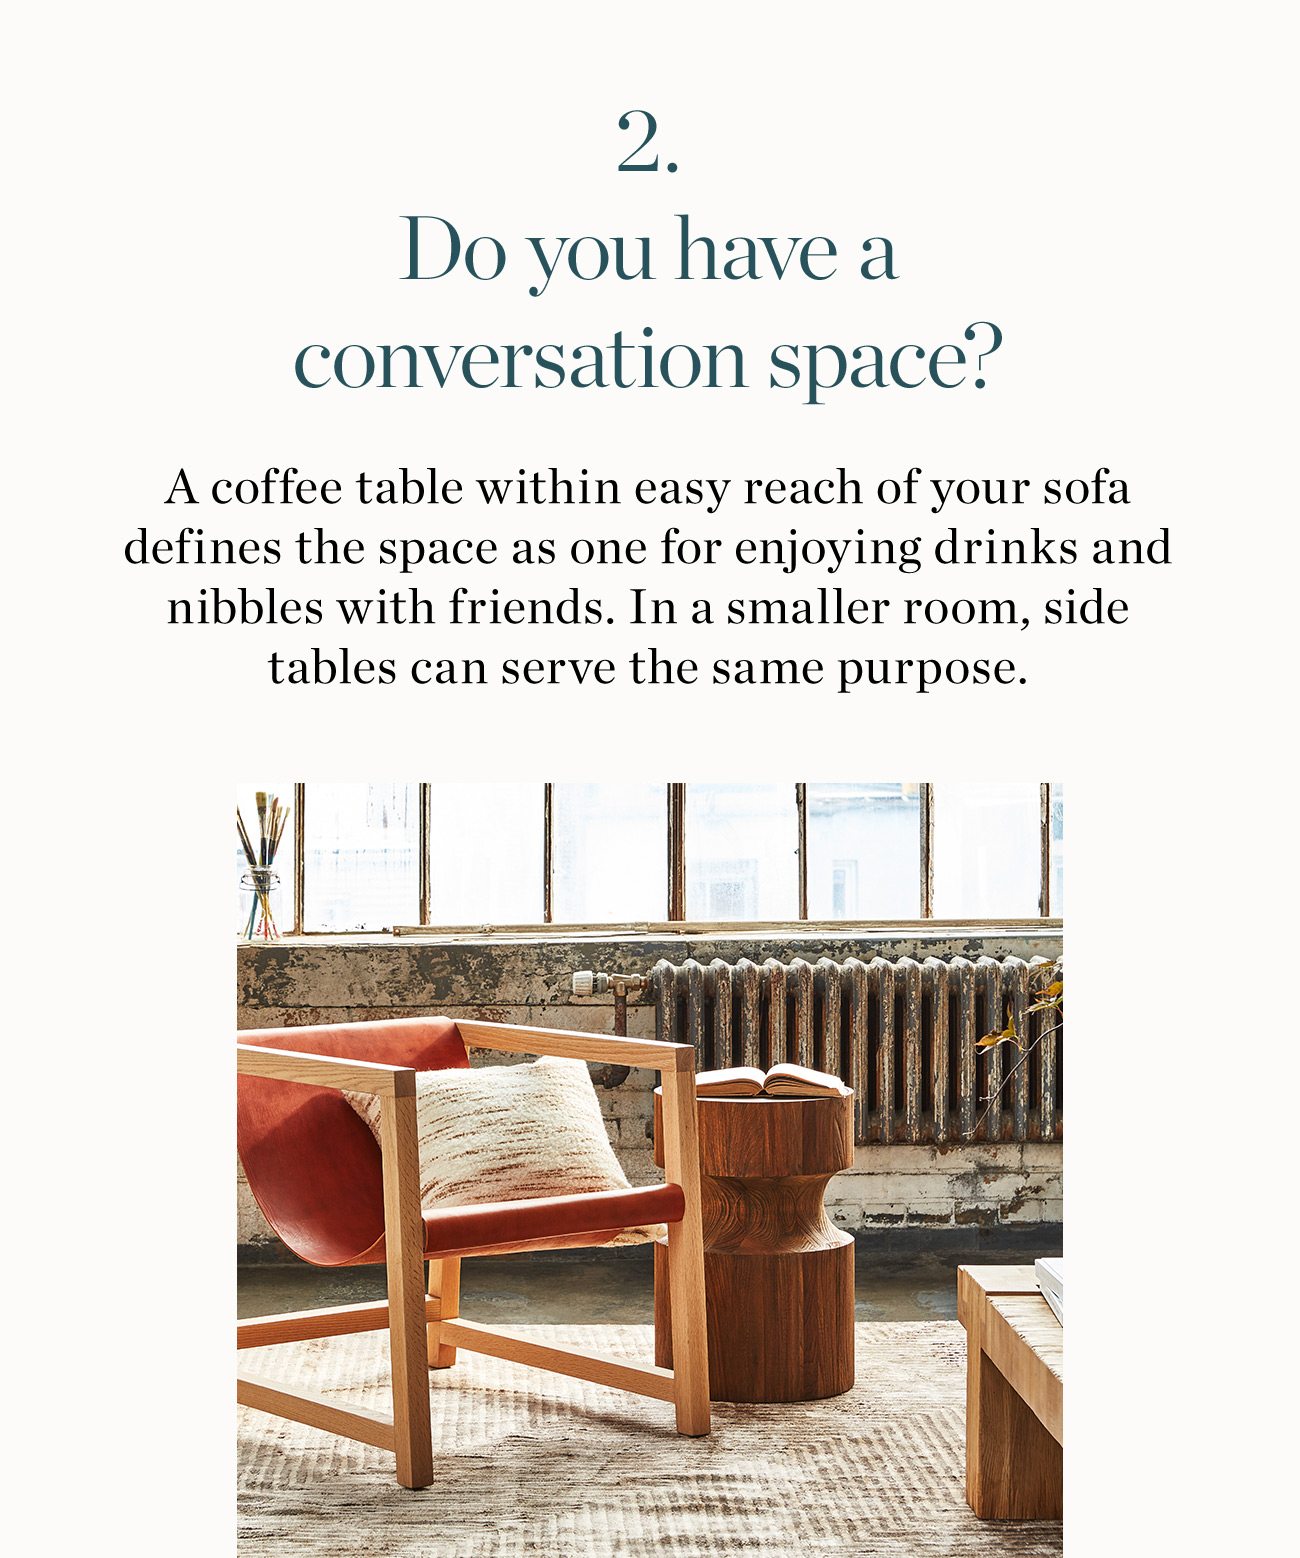 2. Do you have a conversation space?